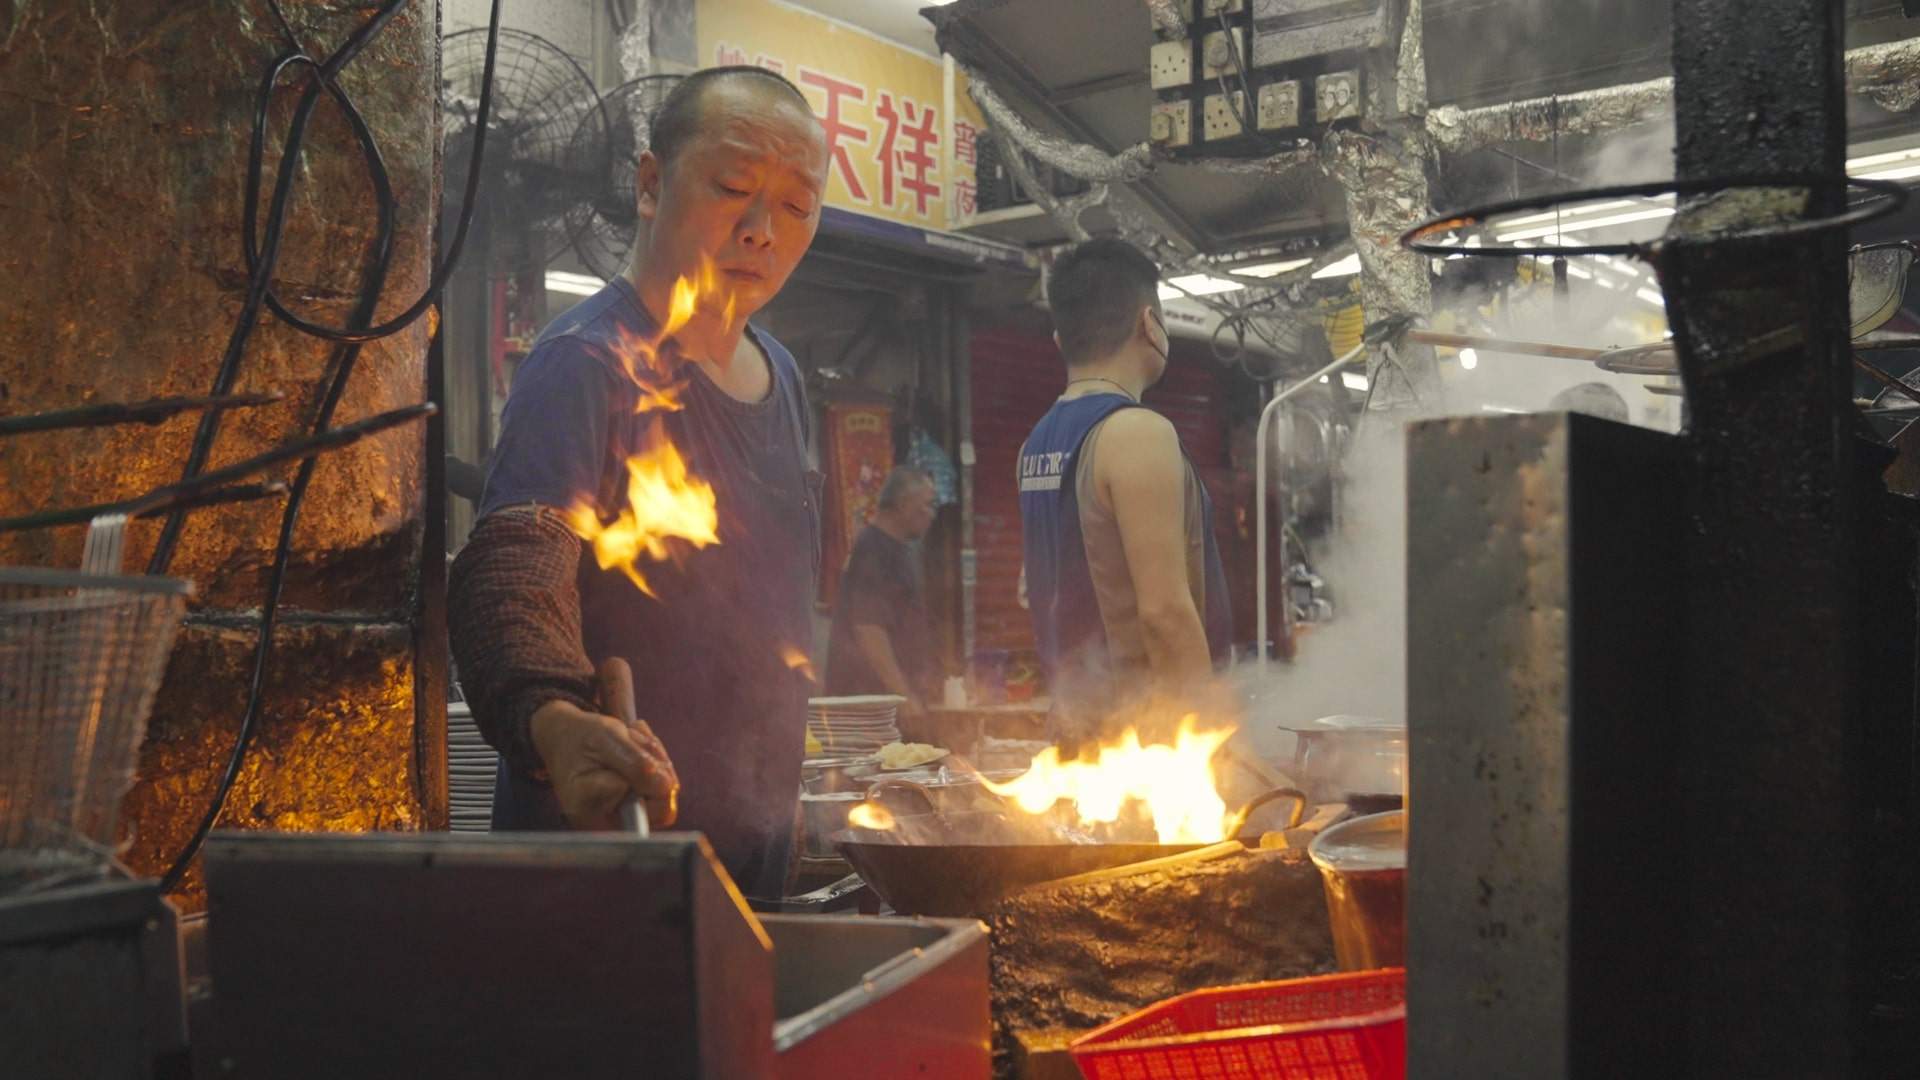 Dai pai dong cooks in Sham Shui Po on May 1. Increasingly, tourists prefer grit to glitter, turning away from modern, large-scale, planned events to seek out small, colourful, organic pockets of local history and culture. Photo: Llewellyn Cheung